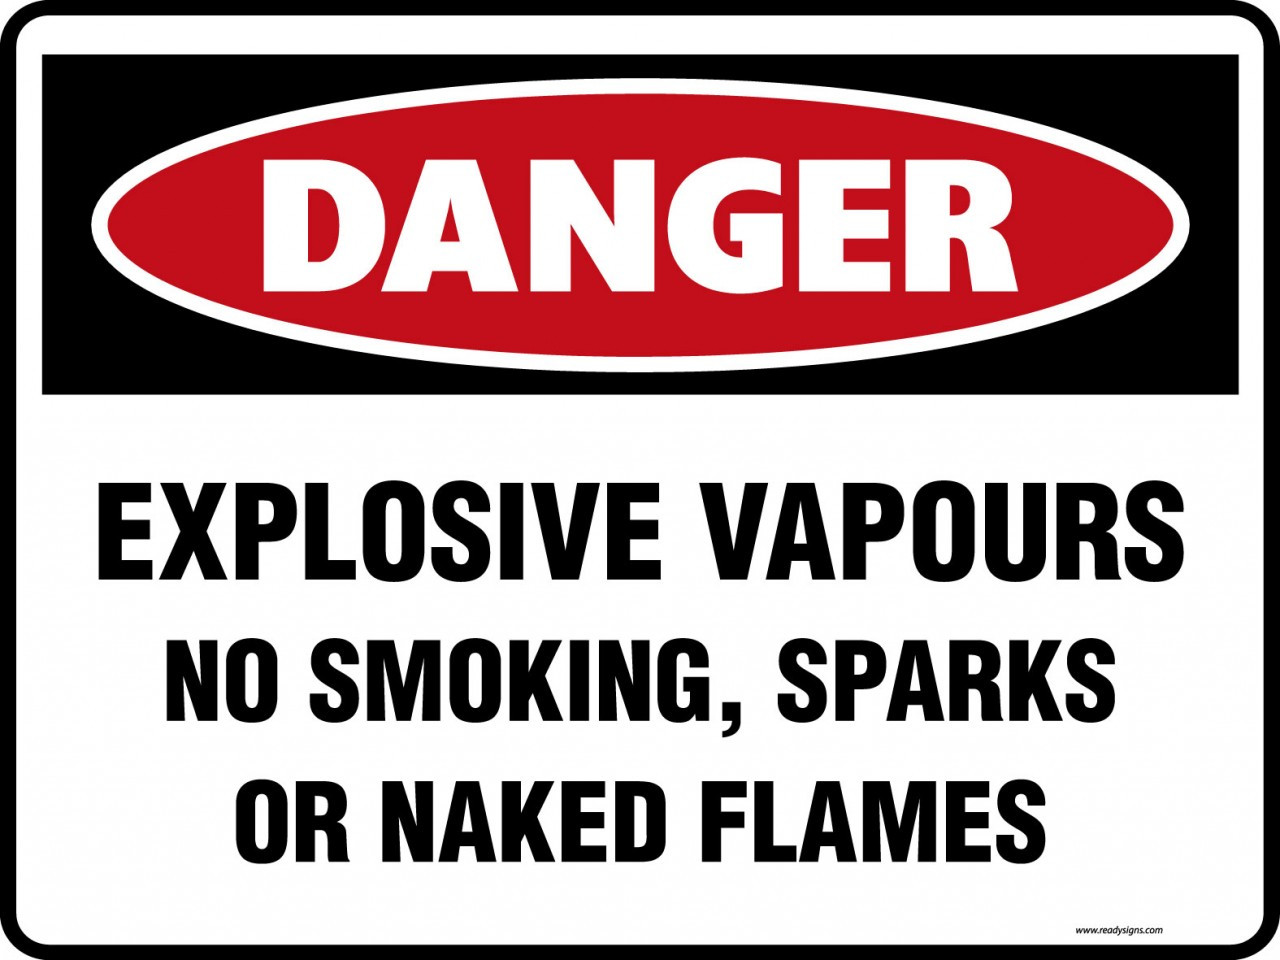 EXPLOSIVE VAPOURS NO SMOKING SPARKS OR NAKED FLAMES Danger Signs 